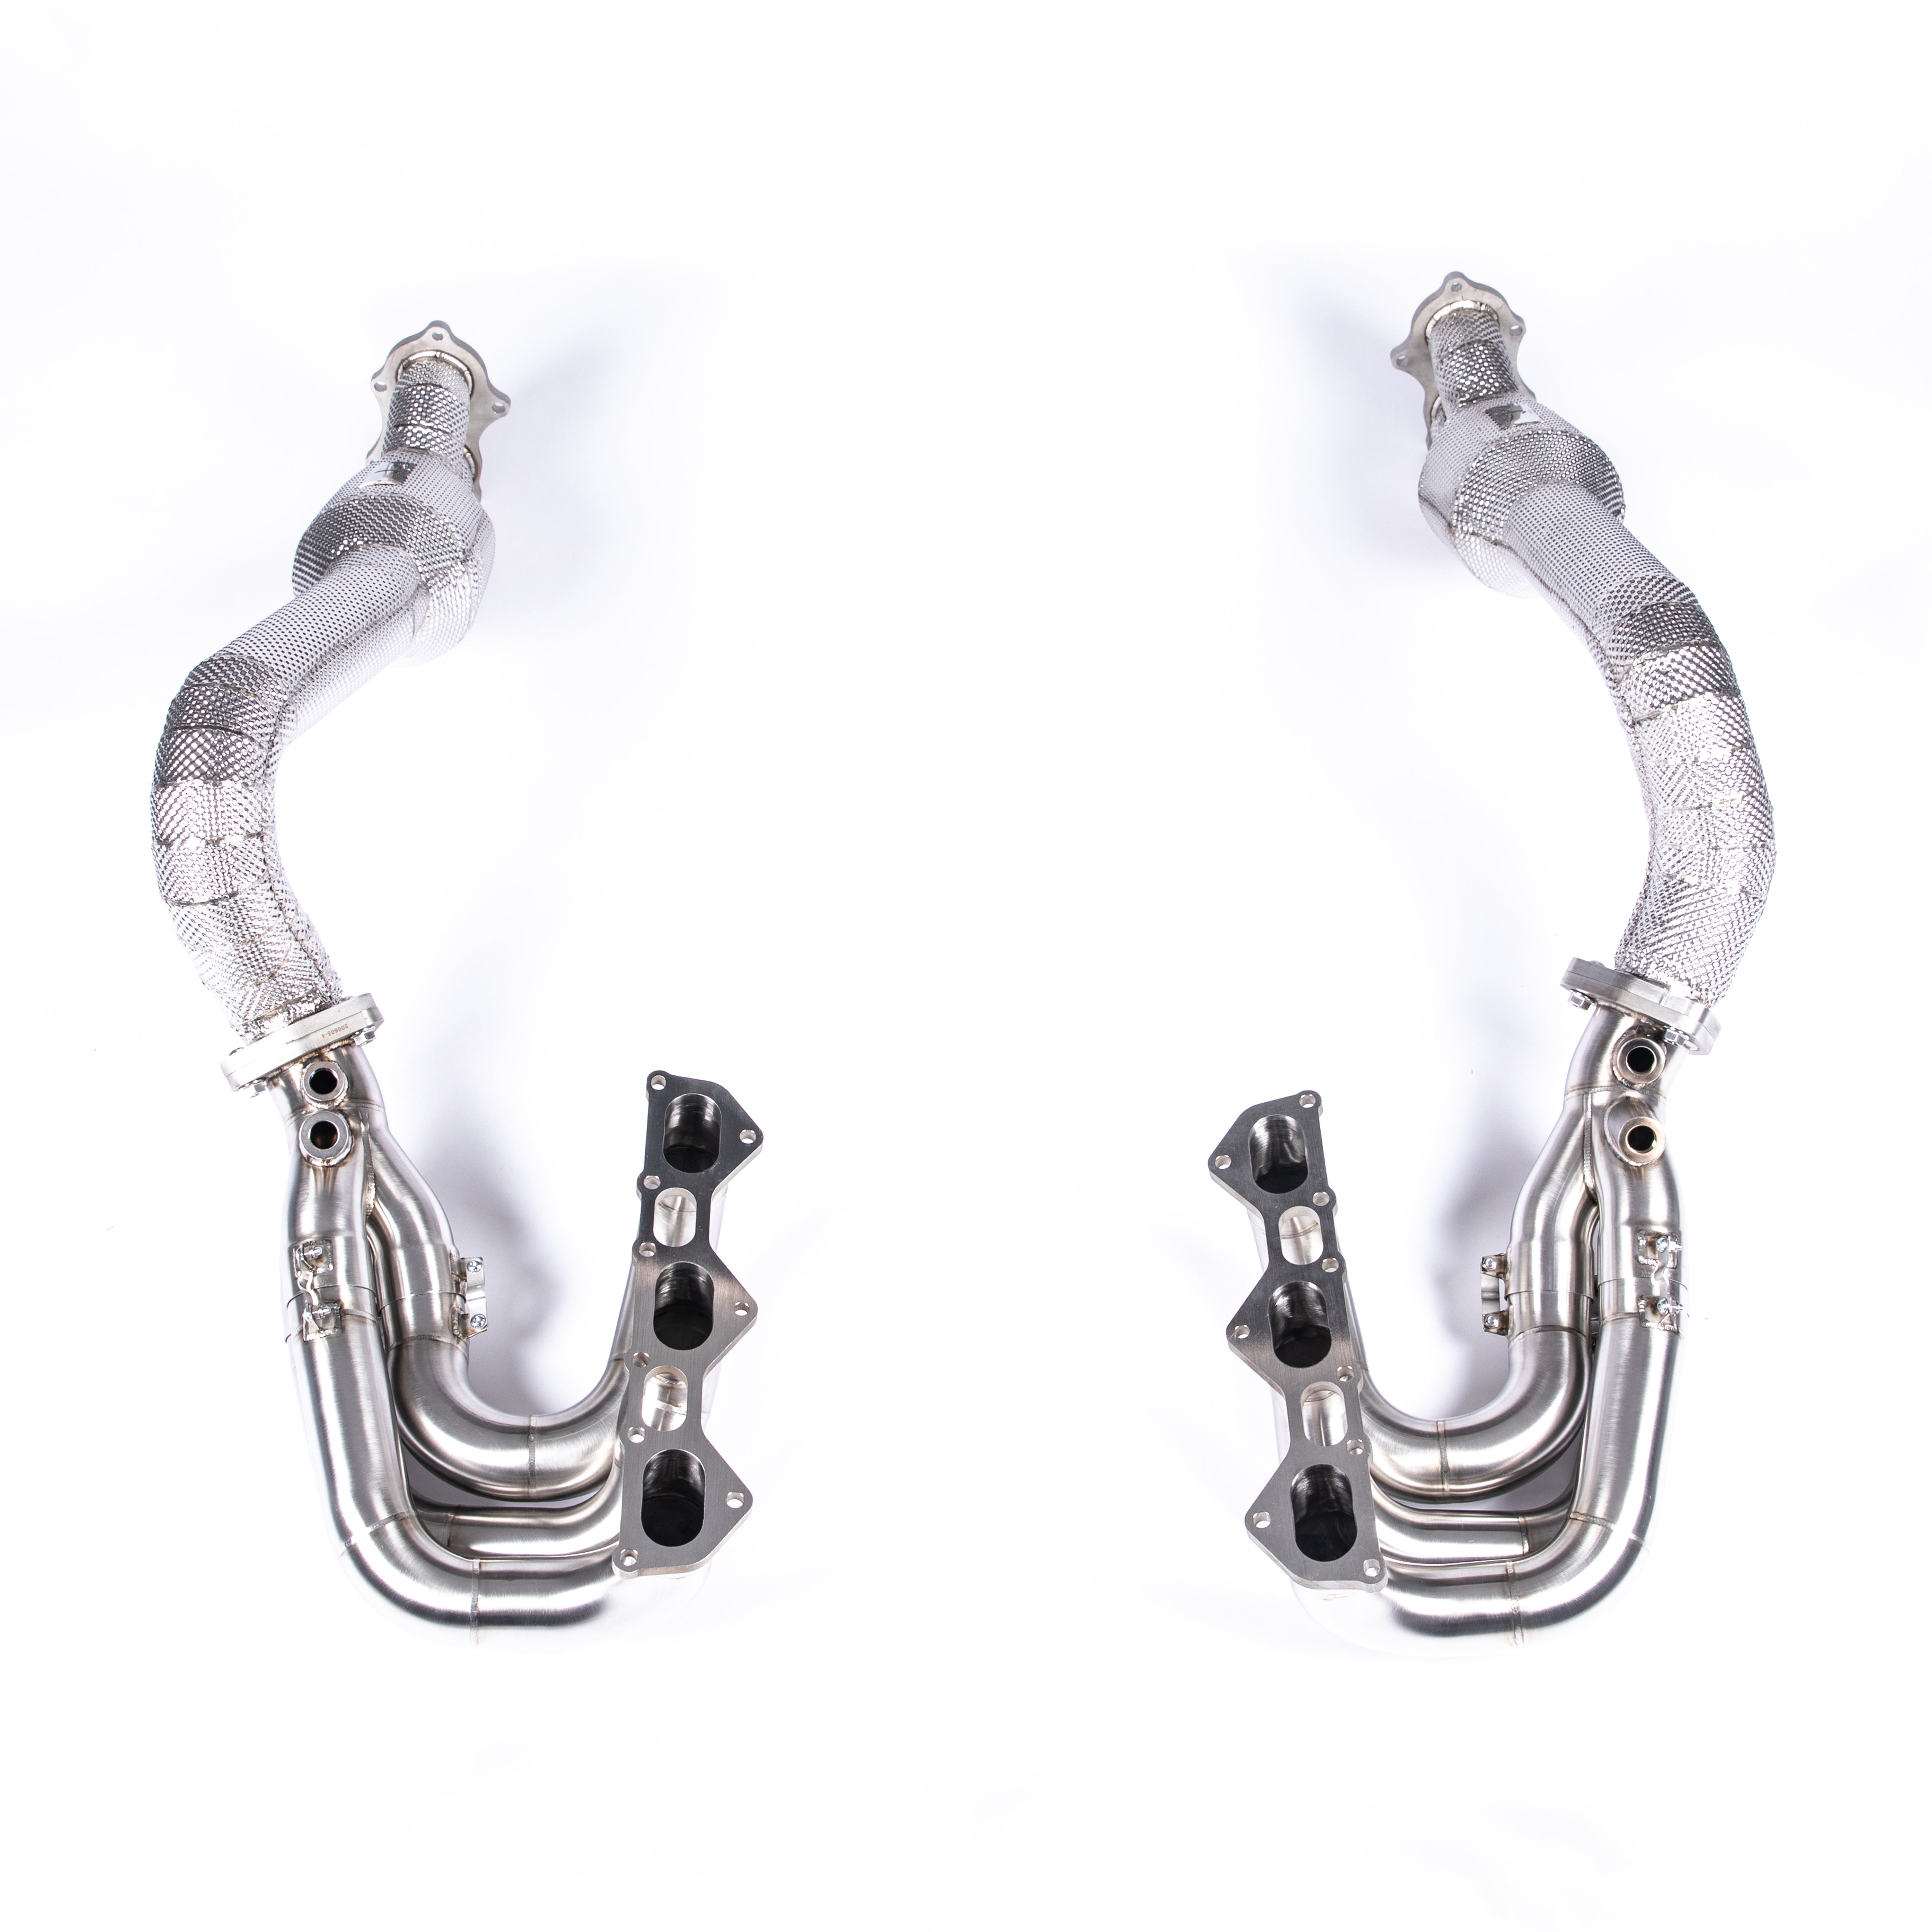 INCONEL RACE MANIFOLD &amp; LINK ROHRE (RACE CATS)